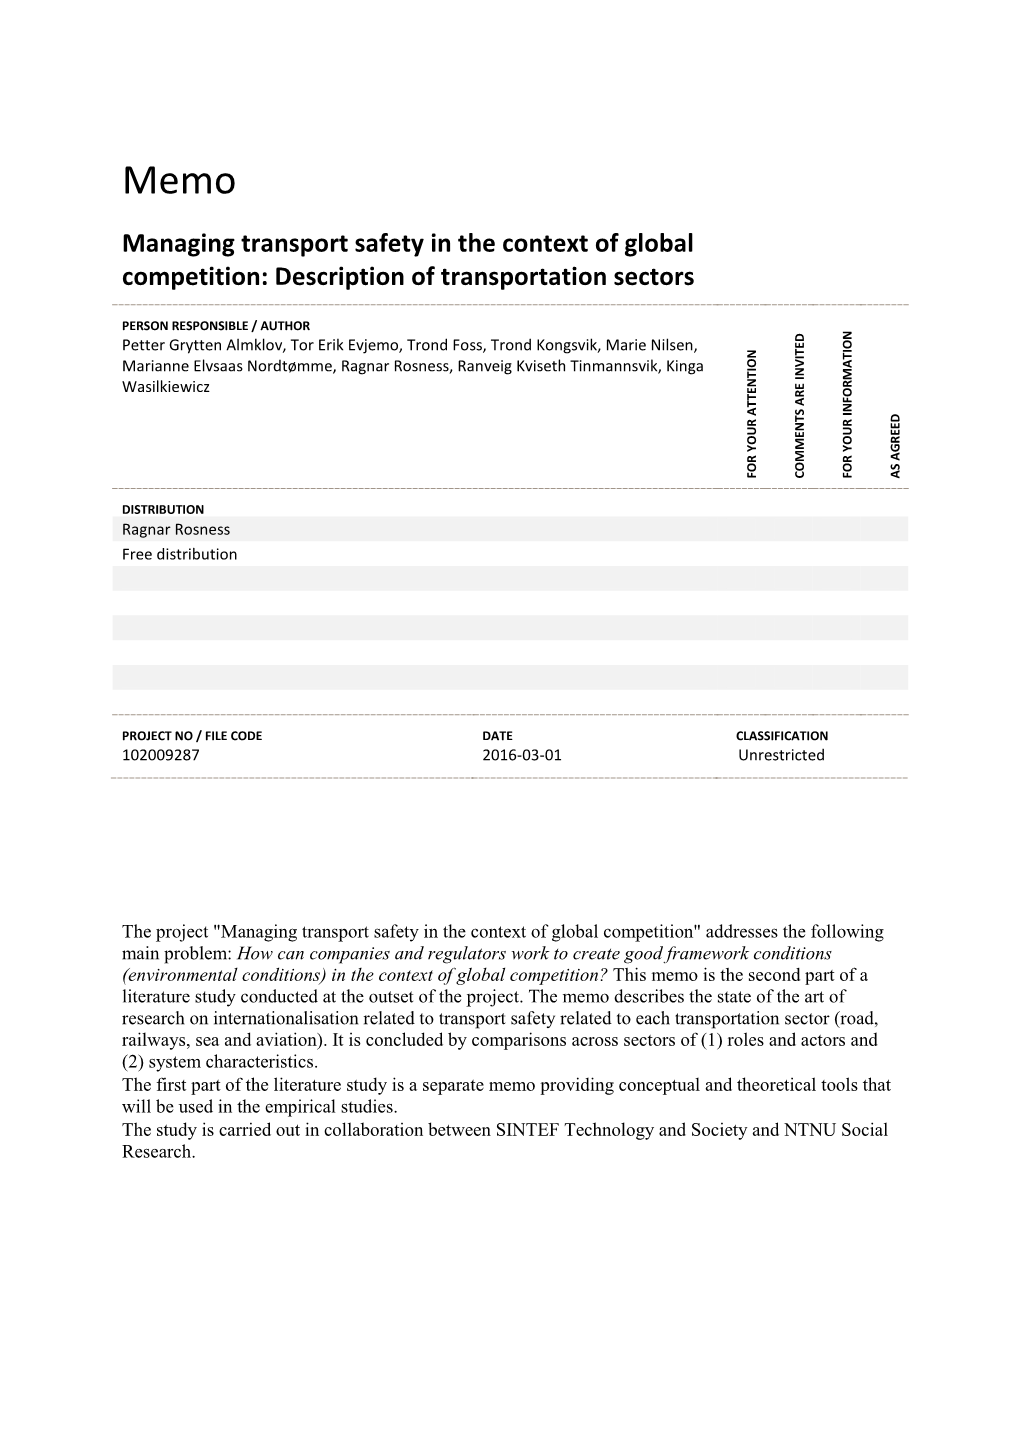 Managing Transport Safety in the Context of Global Competition: Description of Transportation Sectors